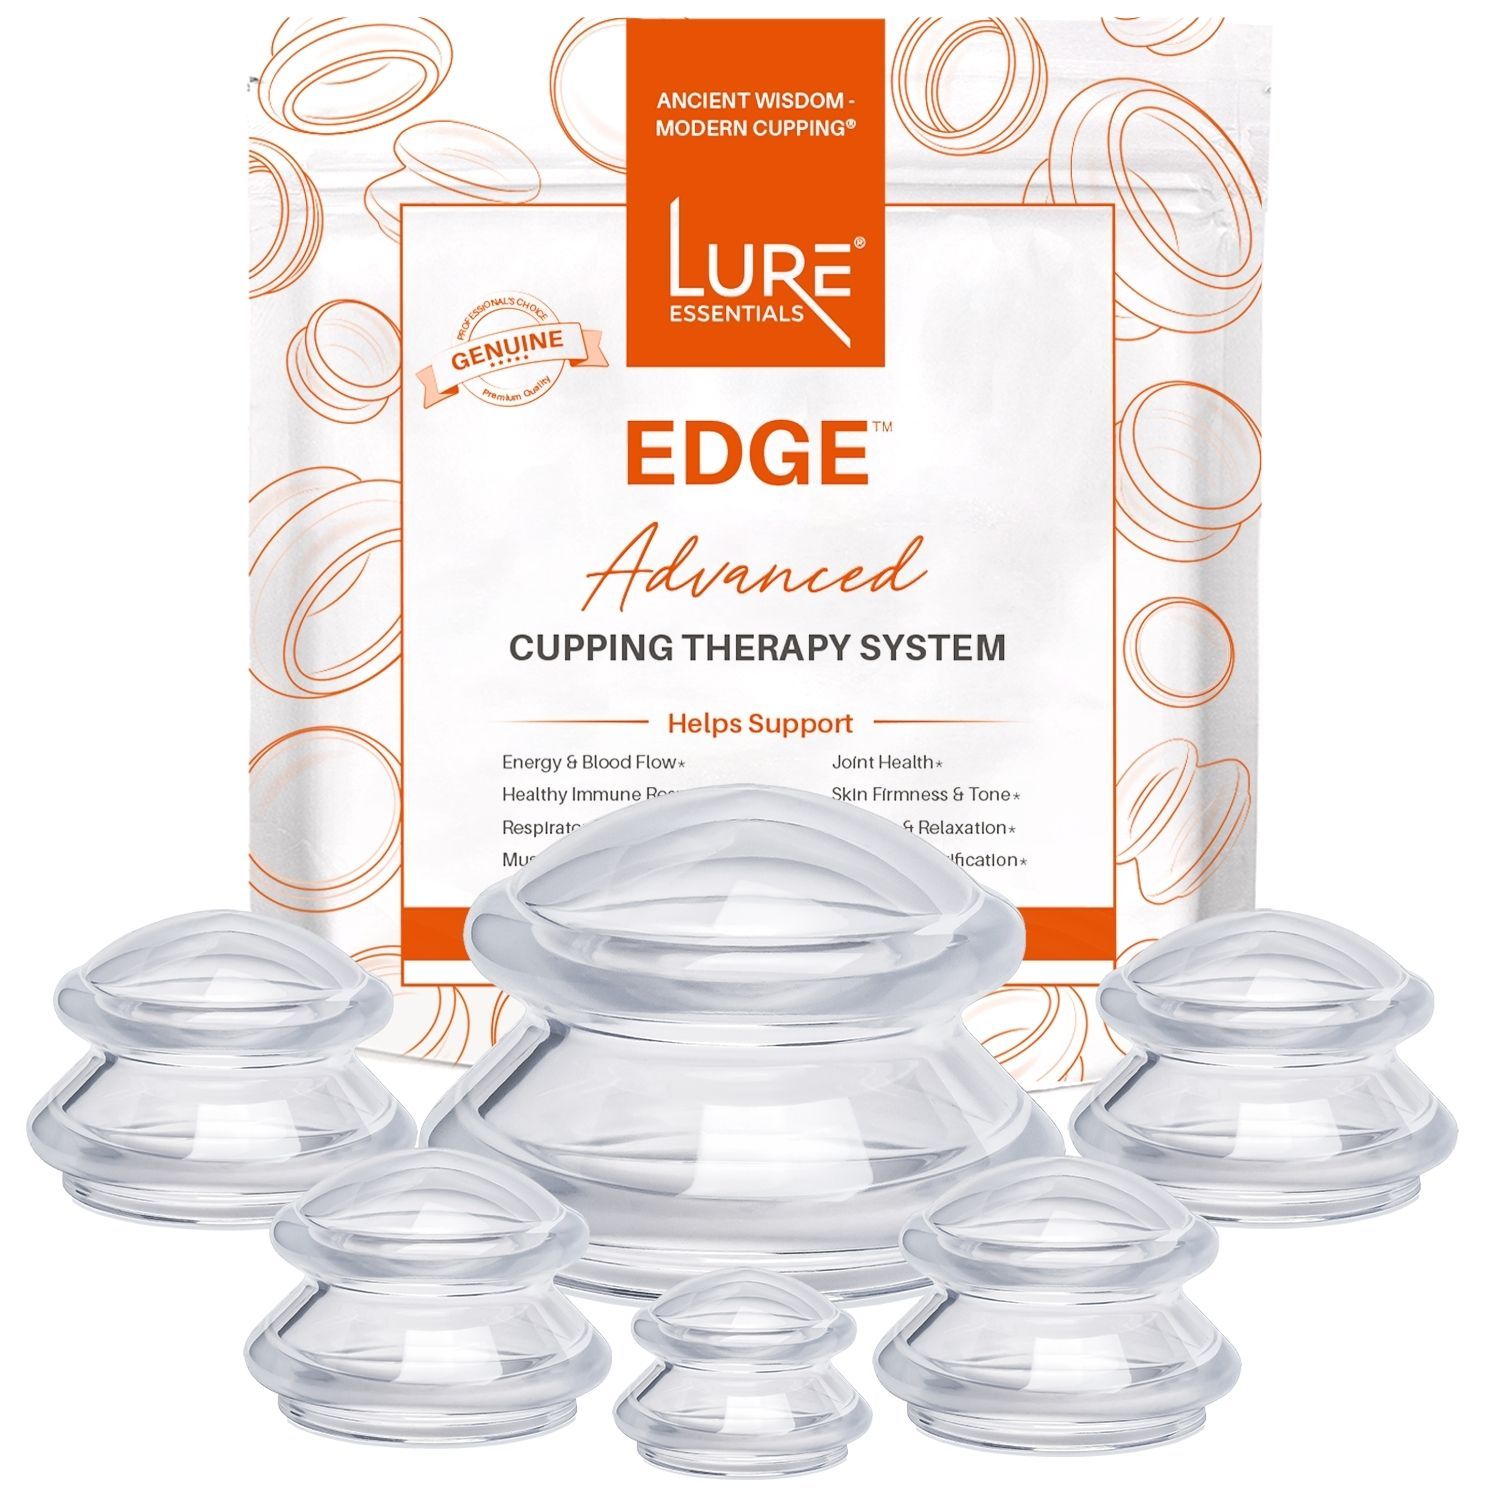 Lure Essentials Edge Cupping Set of 6 - Clear